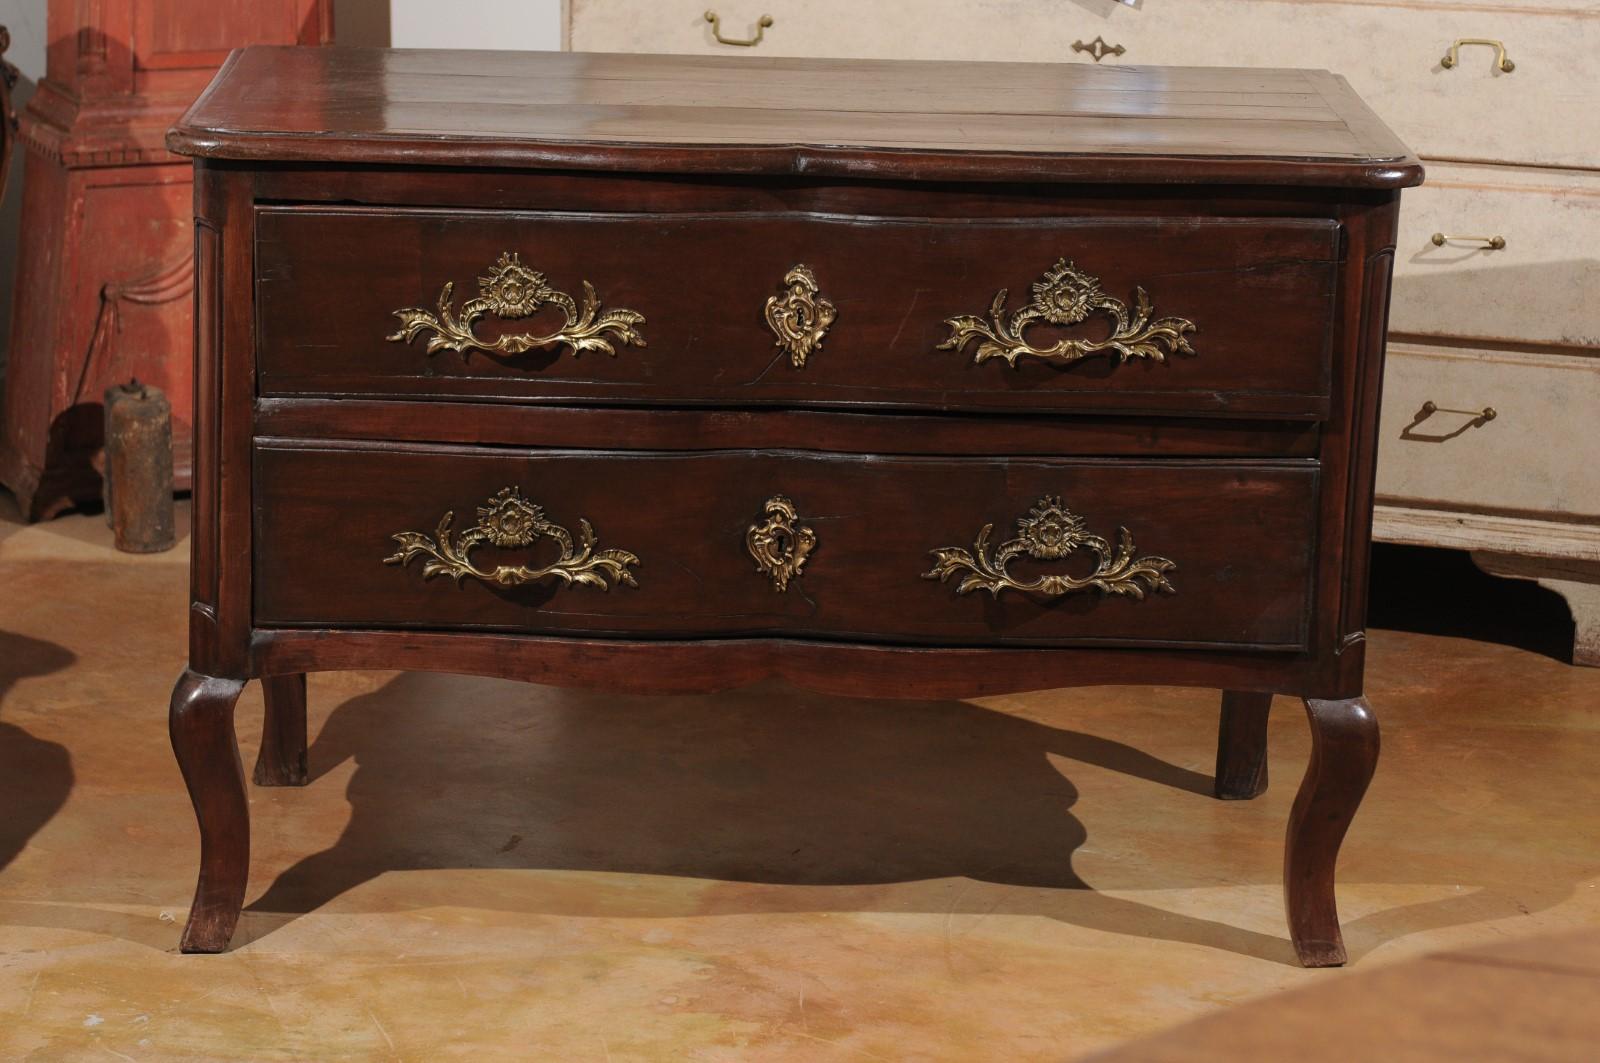 A French Louis XV period mid-18th century two-drawer fruitwood commode with bronze Rococo hardware, from the Cévennes region. Born in the mountainous south-central area of France during the reign of King Louis XV, nicknamed 